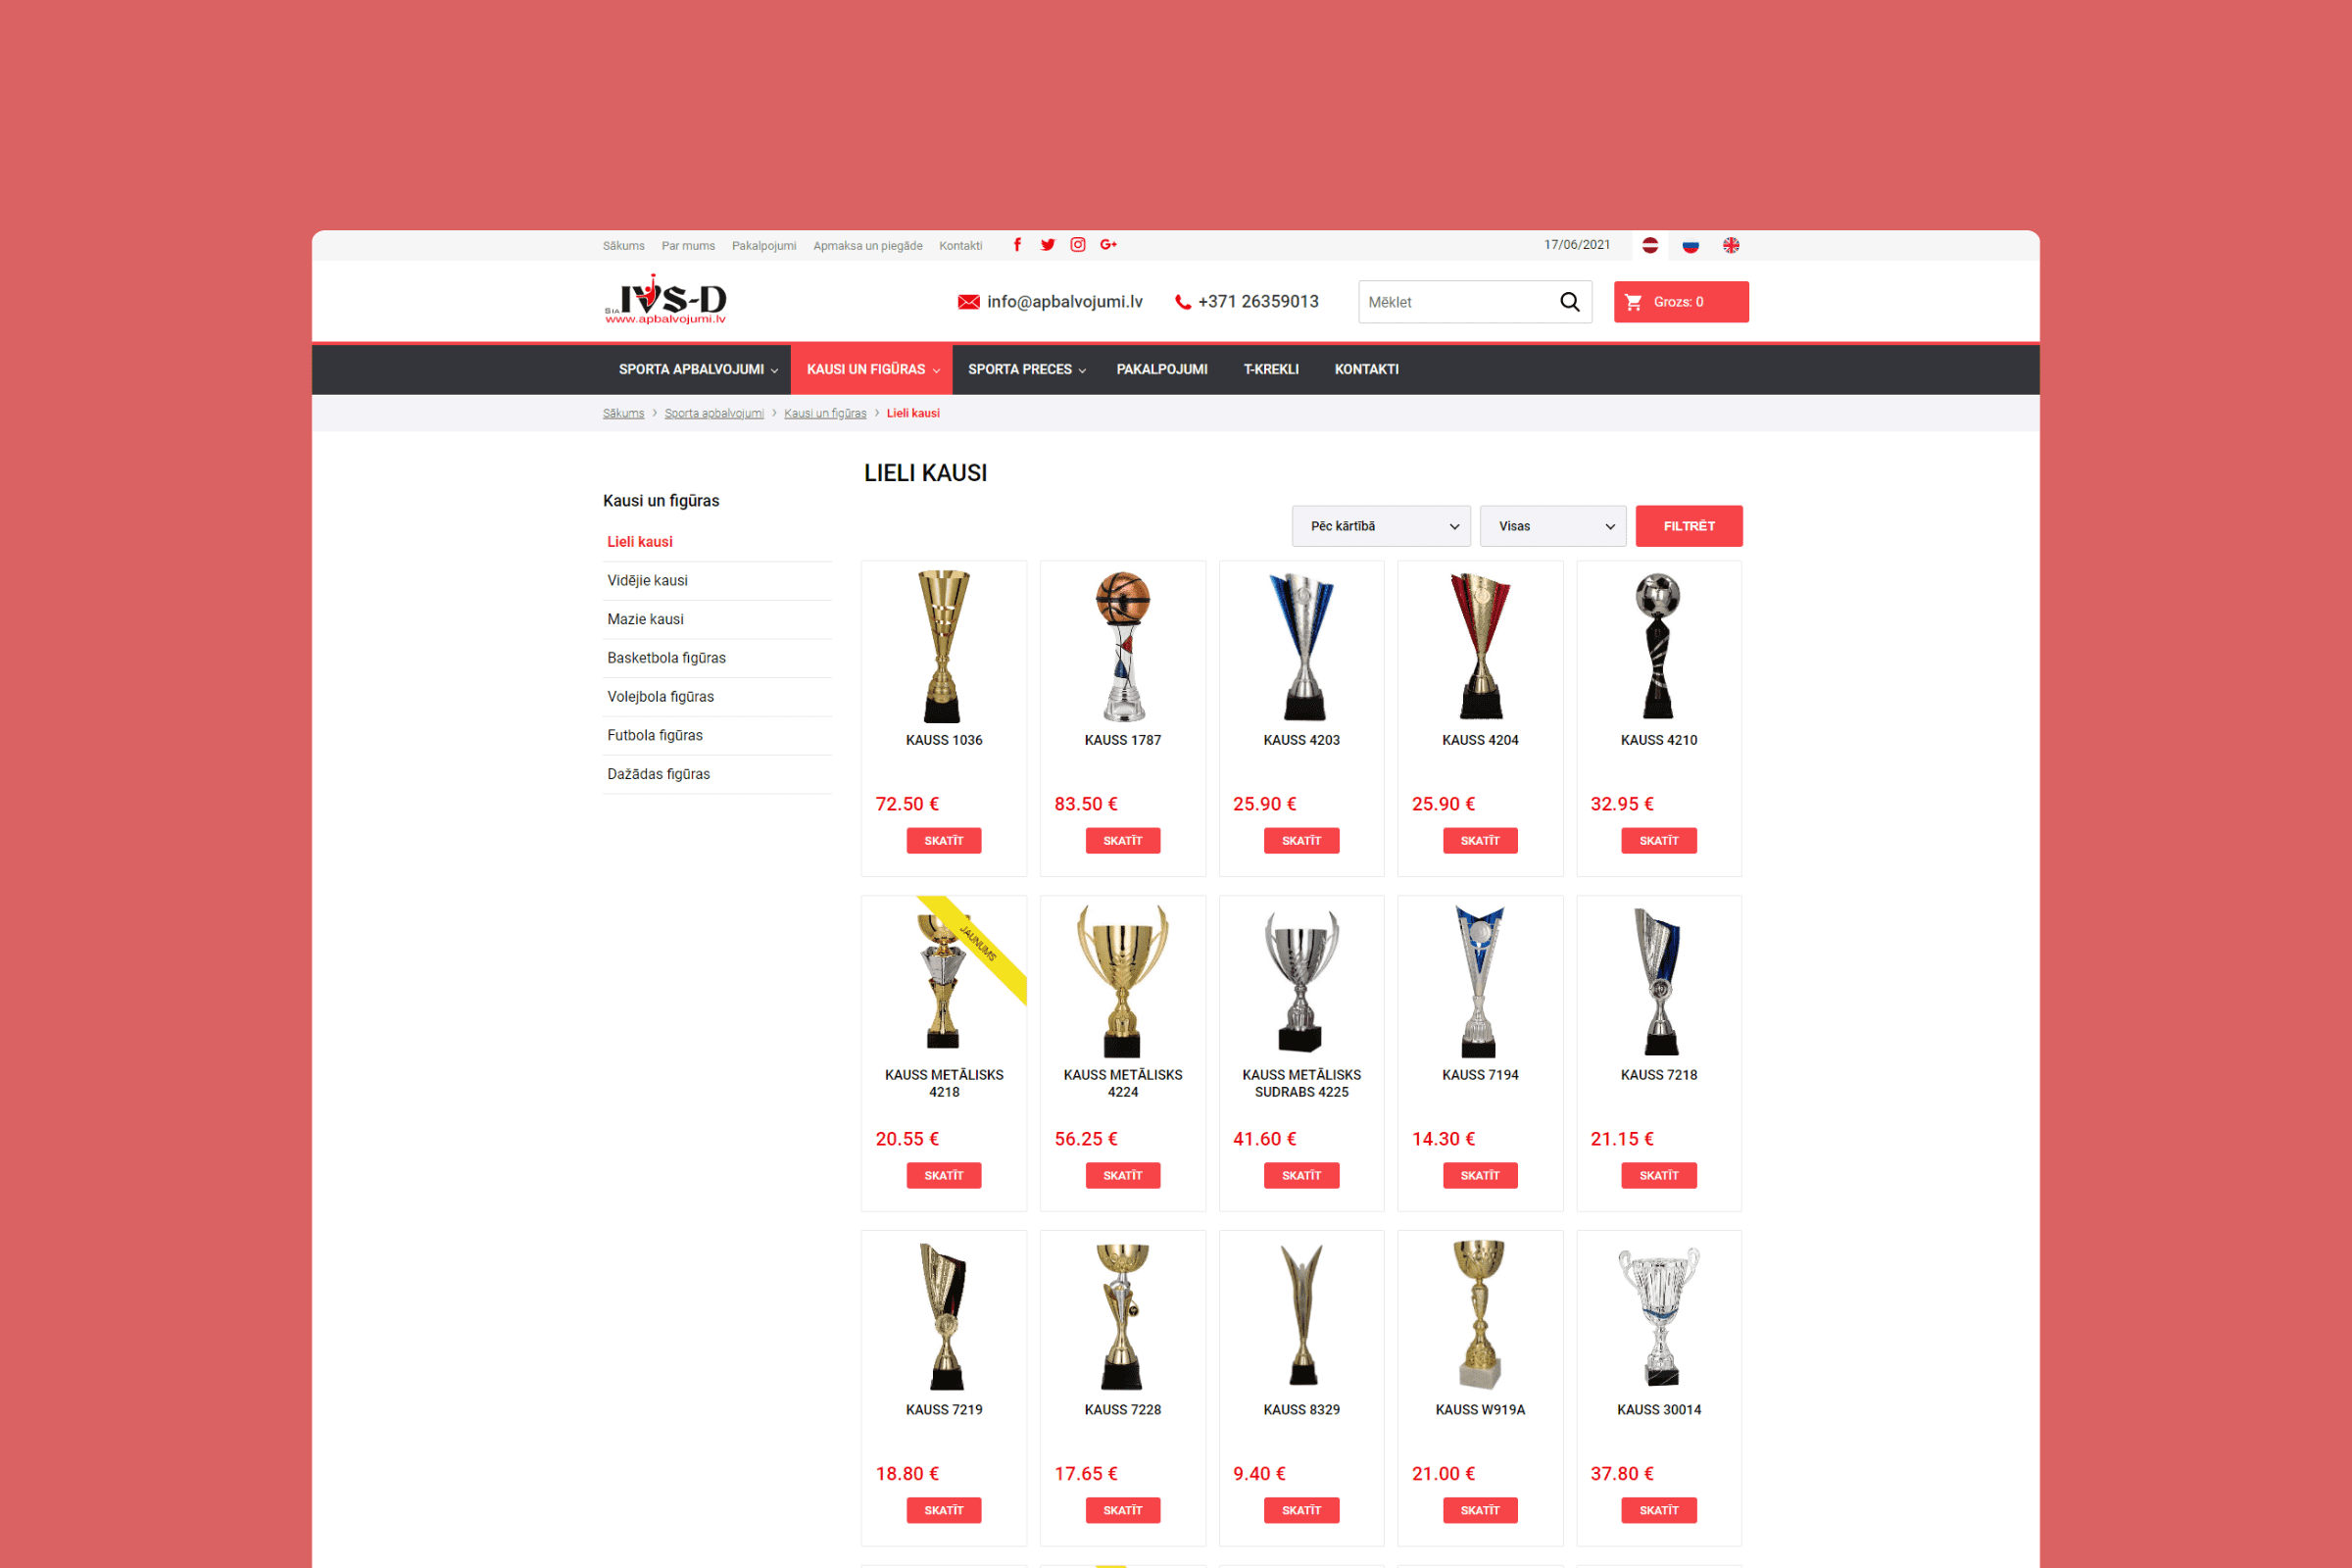 IVSD SIA awards online store